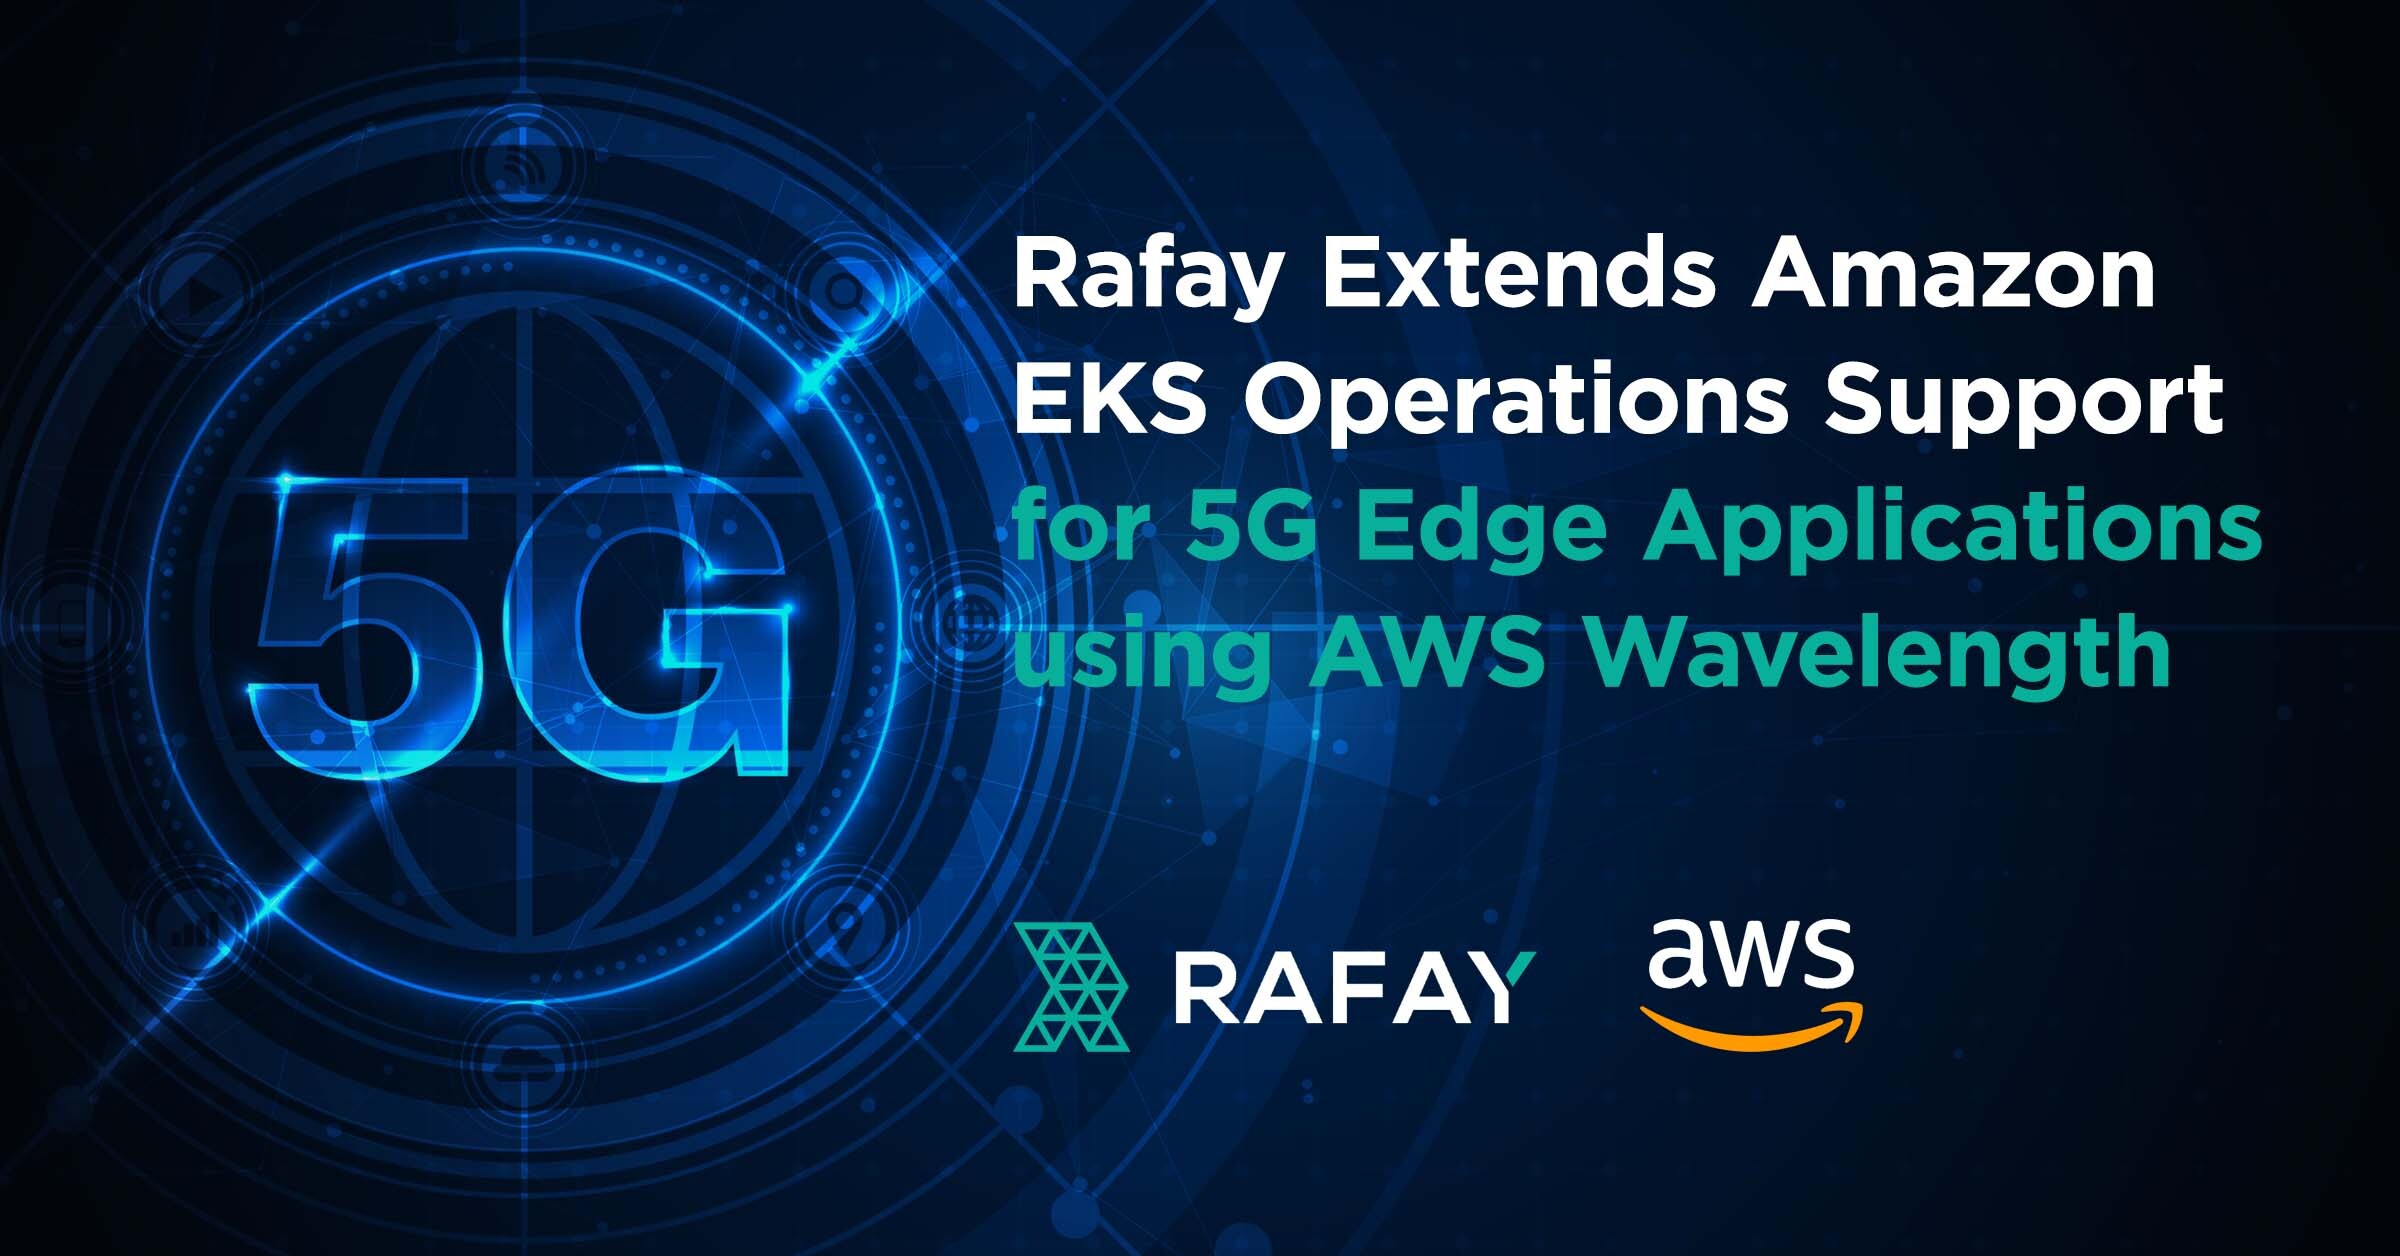 Image for Rafay Extends Amazon EKS Operations Support for 5G Edge Applications using AWS Wavelength